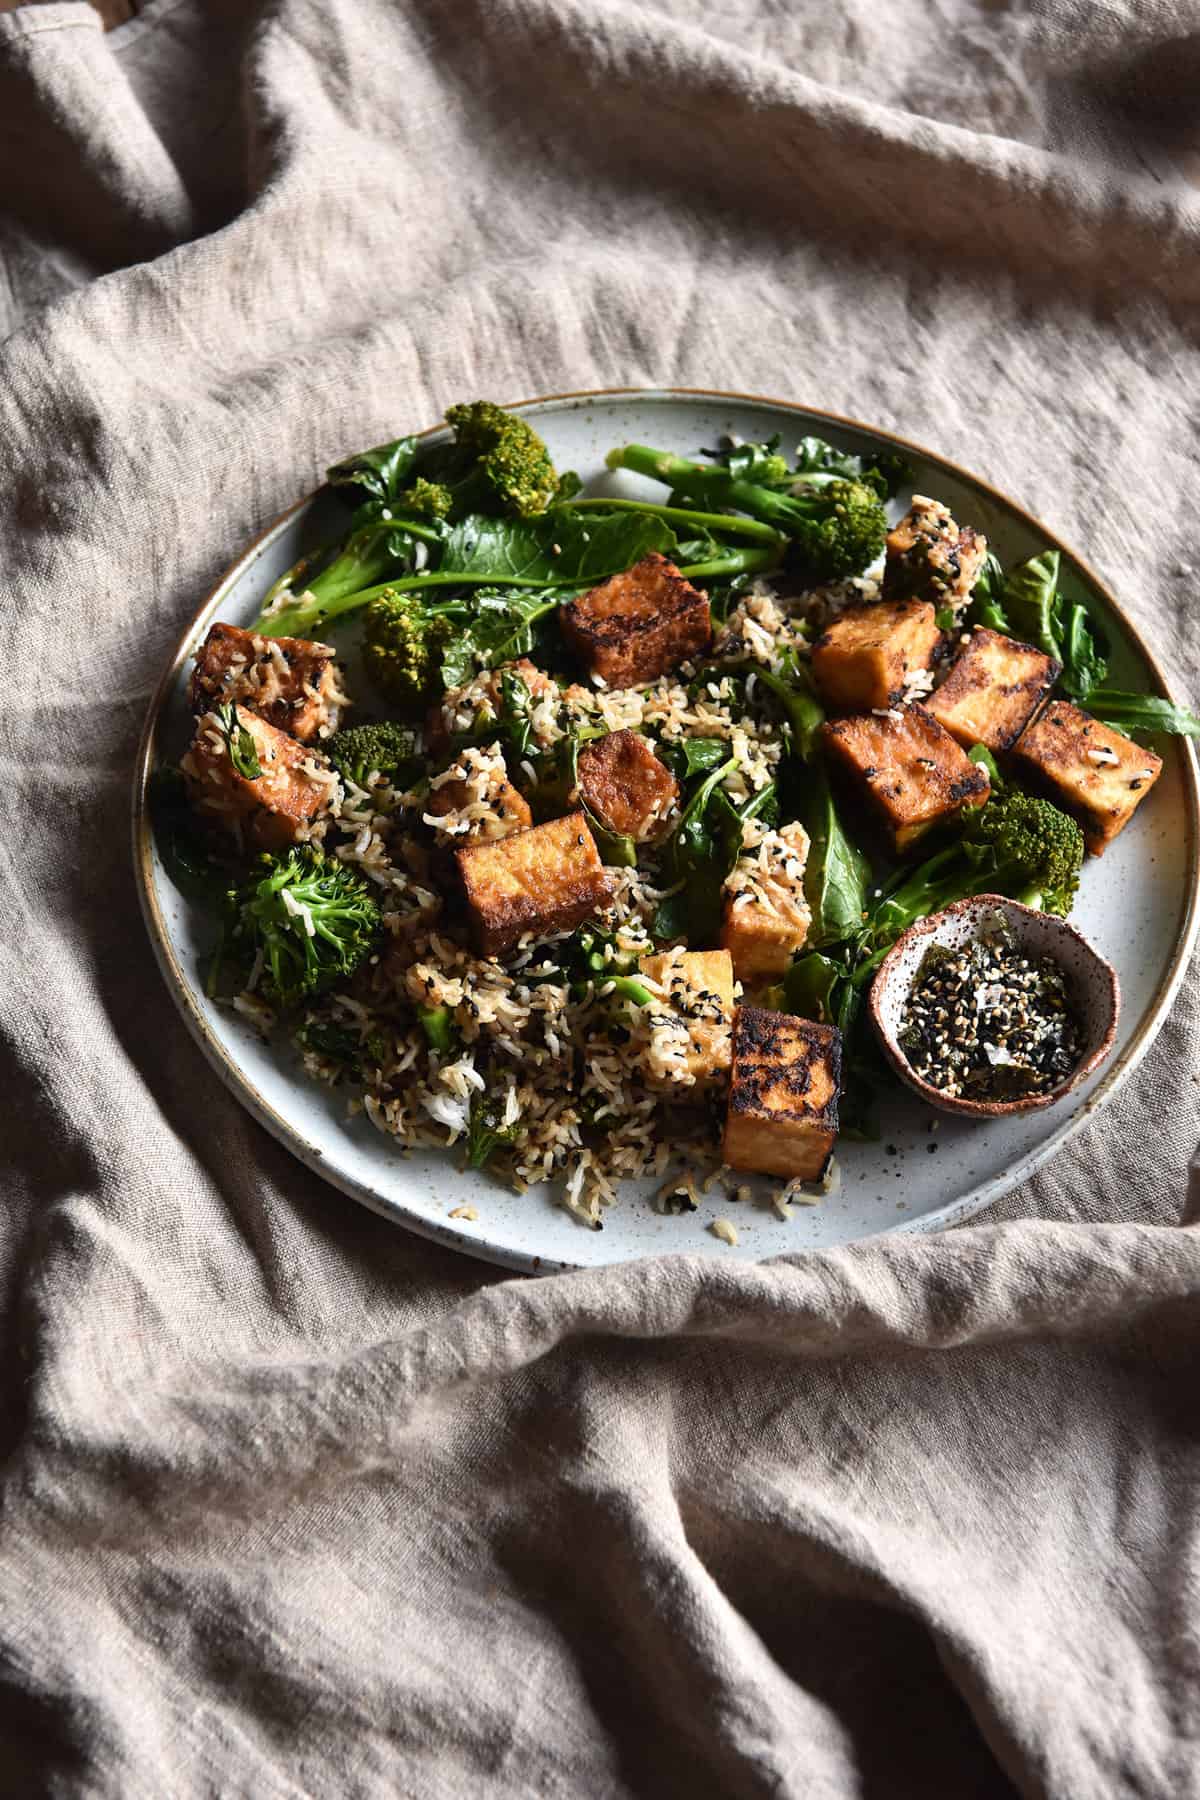 Furikake rice with miso glazed tofu and broccolini on a white ceramic plate that sits on a textured bone coloured linen tablecloth.